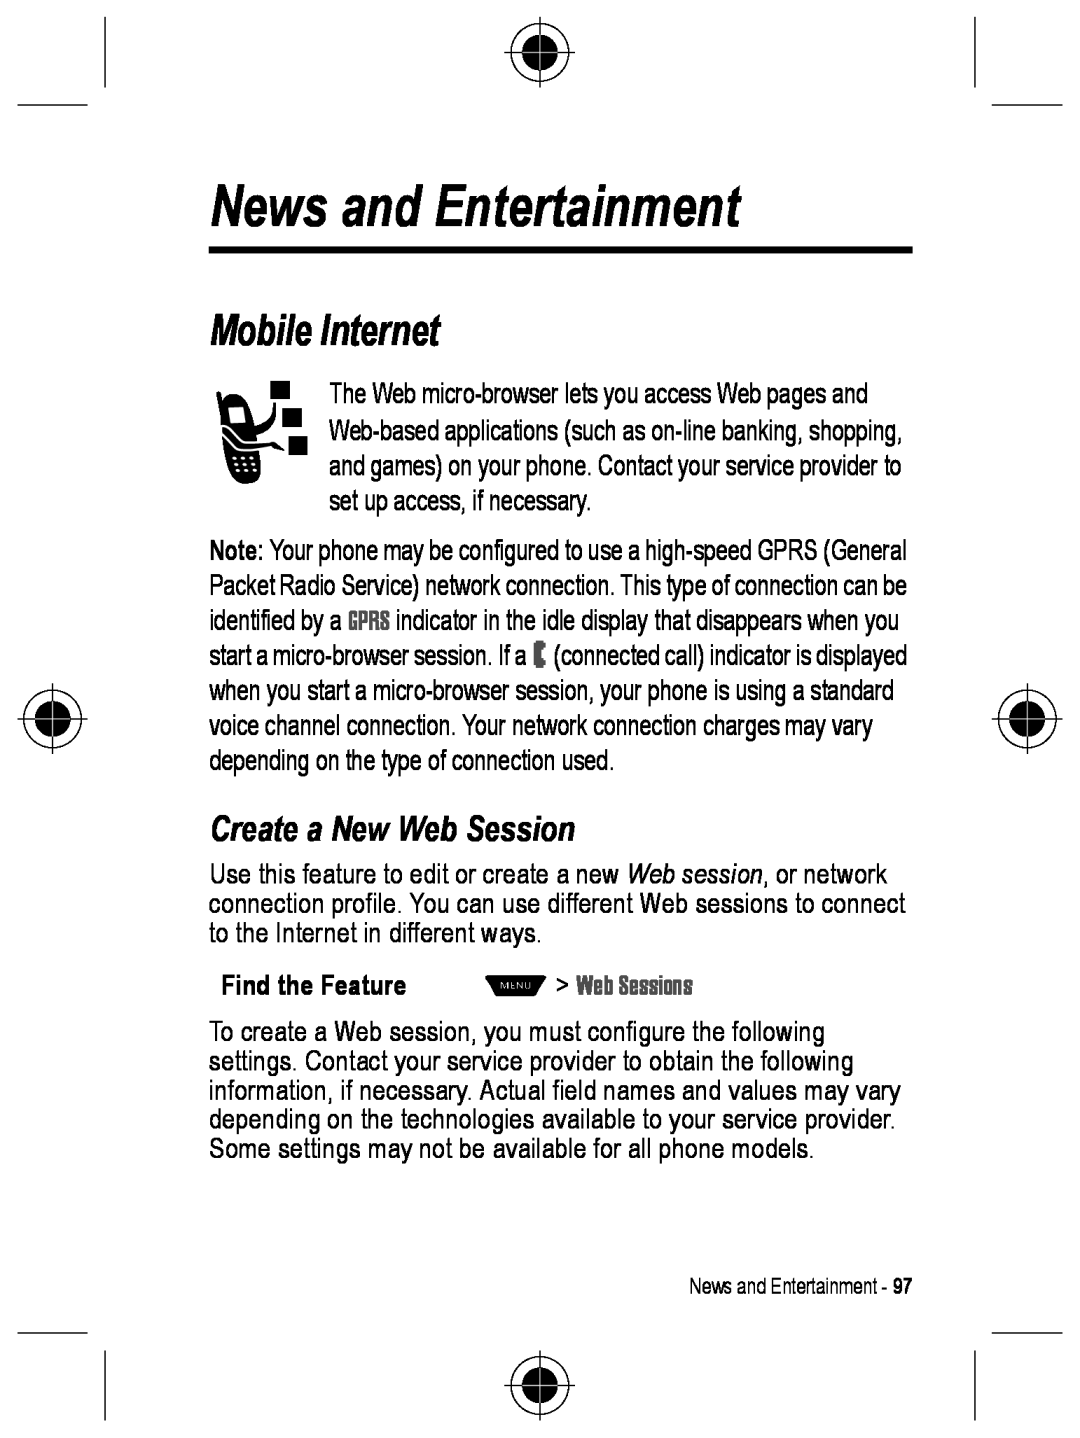 Motorola C330 manual News and Entertainment, Mobile Internet, Create a New Web Session, Find the Feature, M Web Sessions 